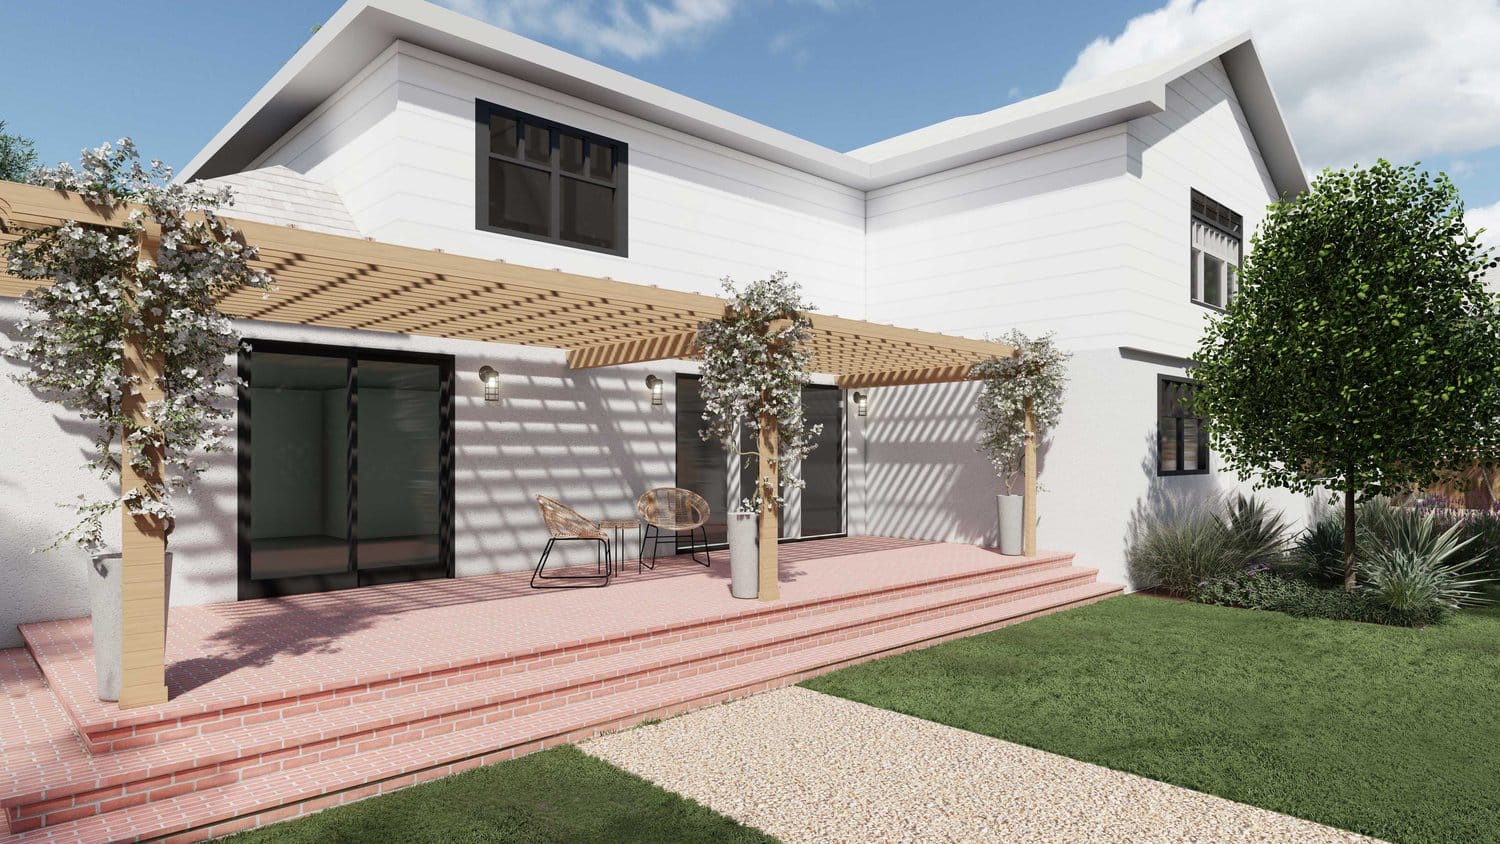 San Antonio backyard patio and pergola with climbing plants over seating area, with gravel pathed lawn, tree and plants